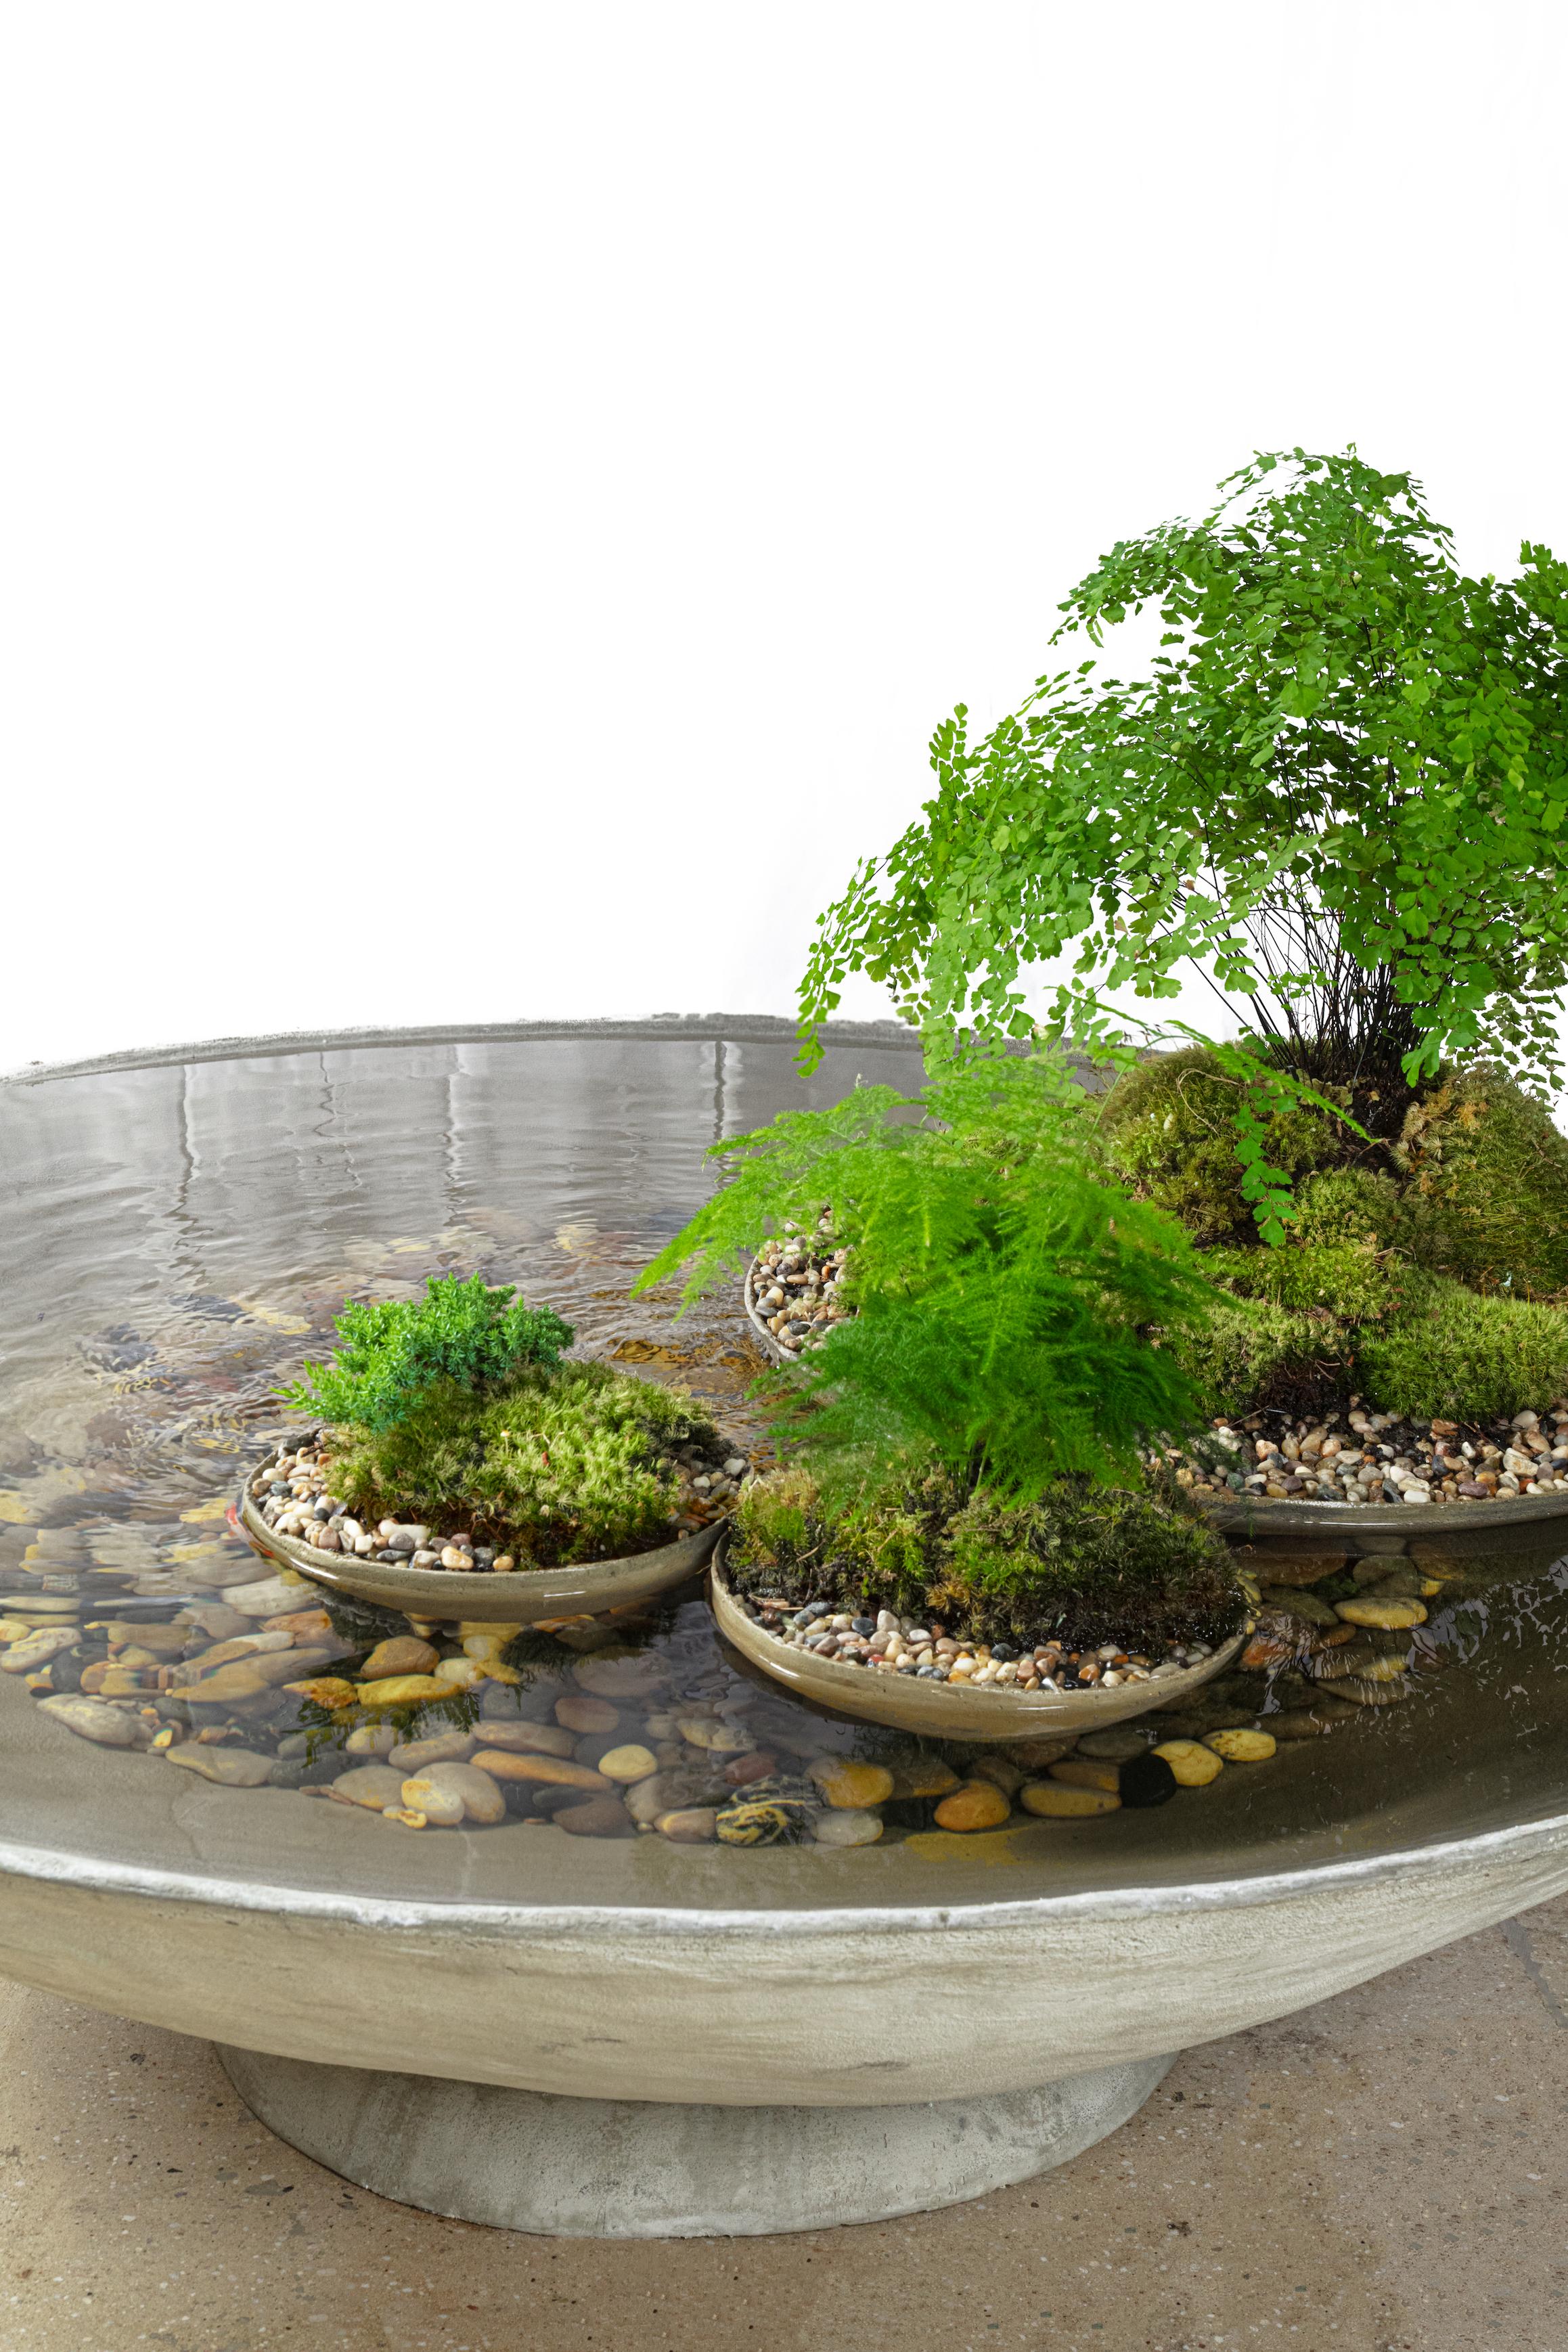 Ukiyo Saucer, Concrete Fountain/Fishpond by OPIARY (D50